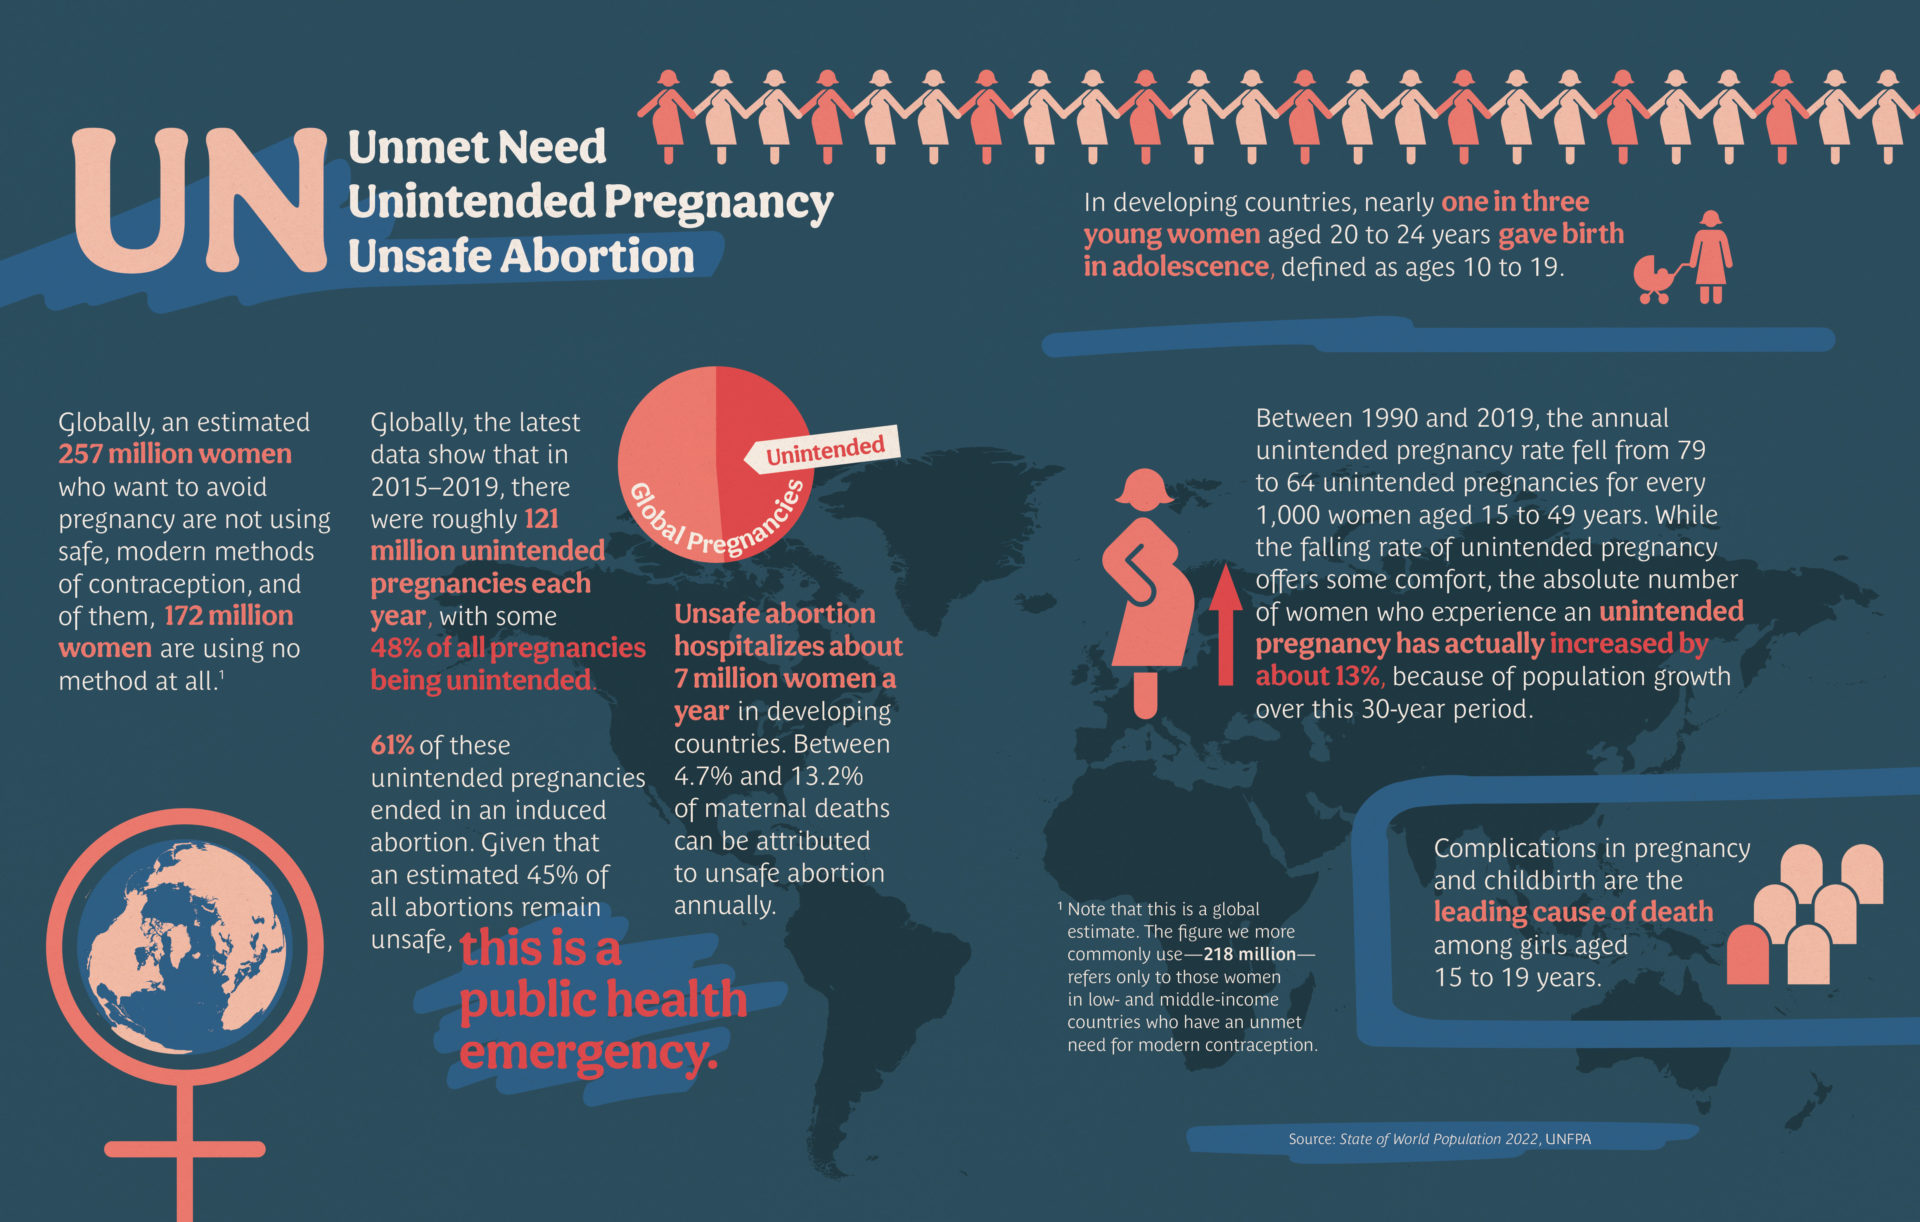 infographic on unmet need and unintended pregnancy